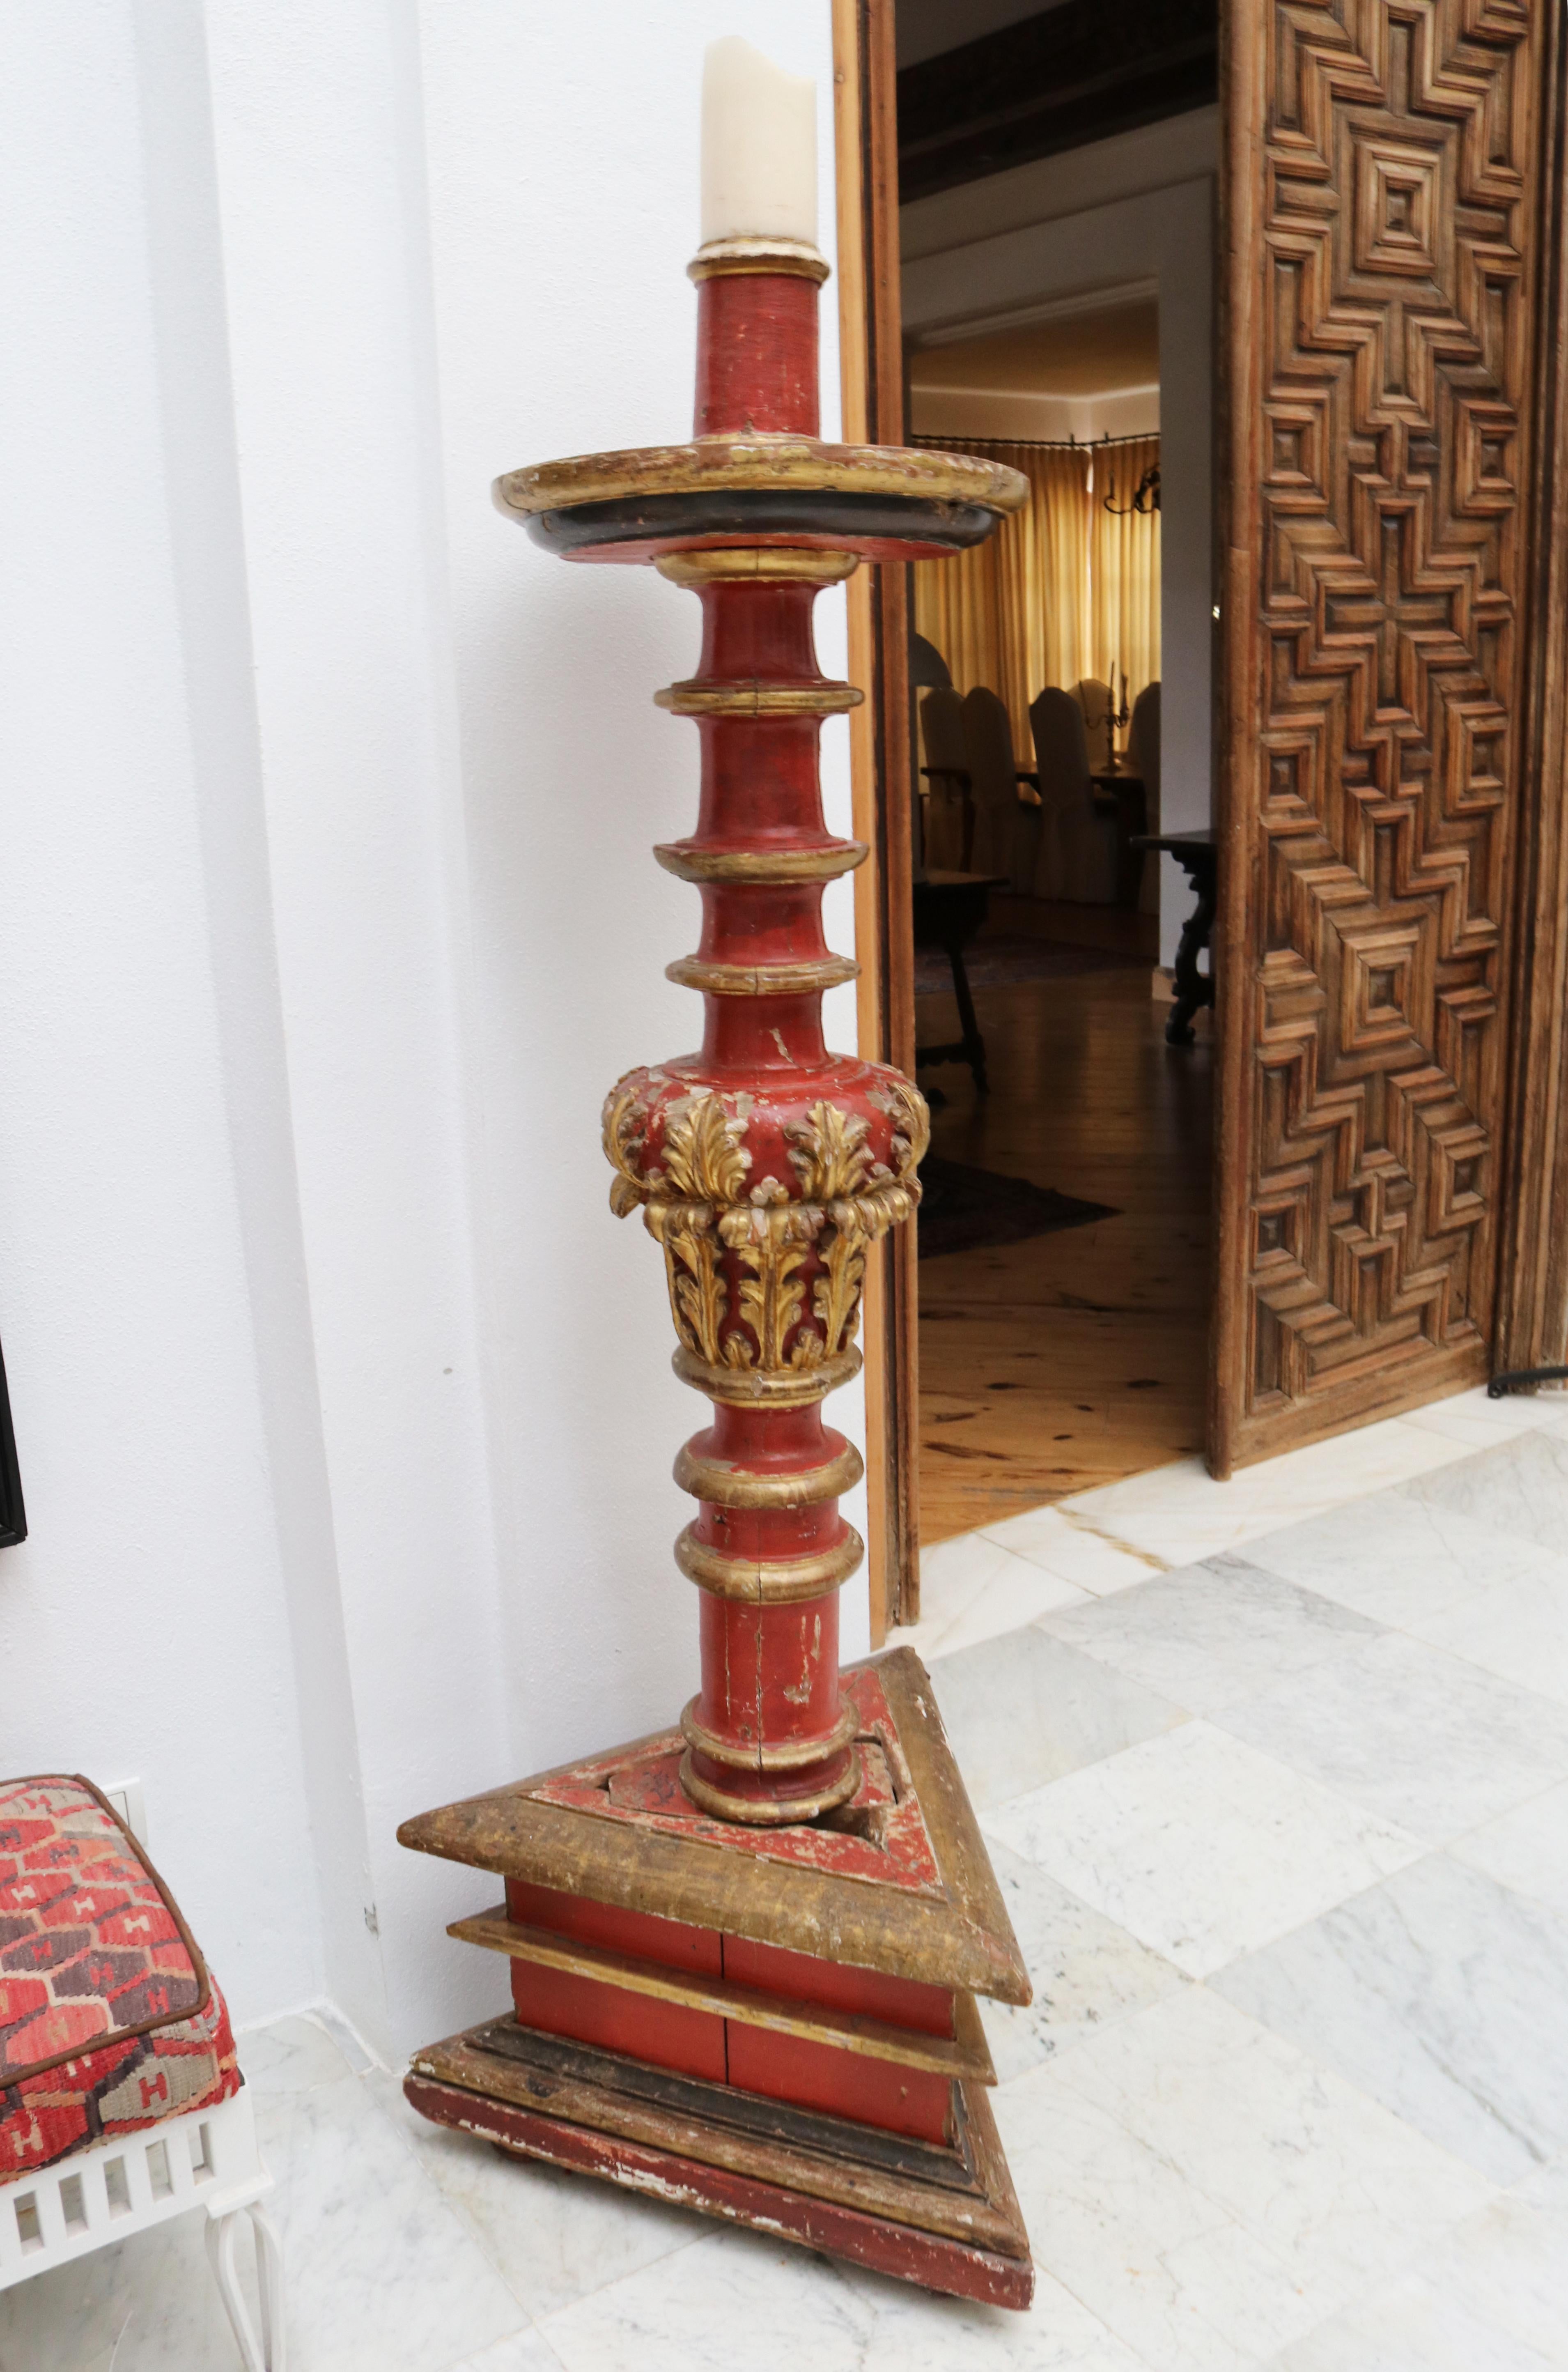 17th century Spanish gold gilded and red painted wooden candle pricket stick.

